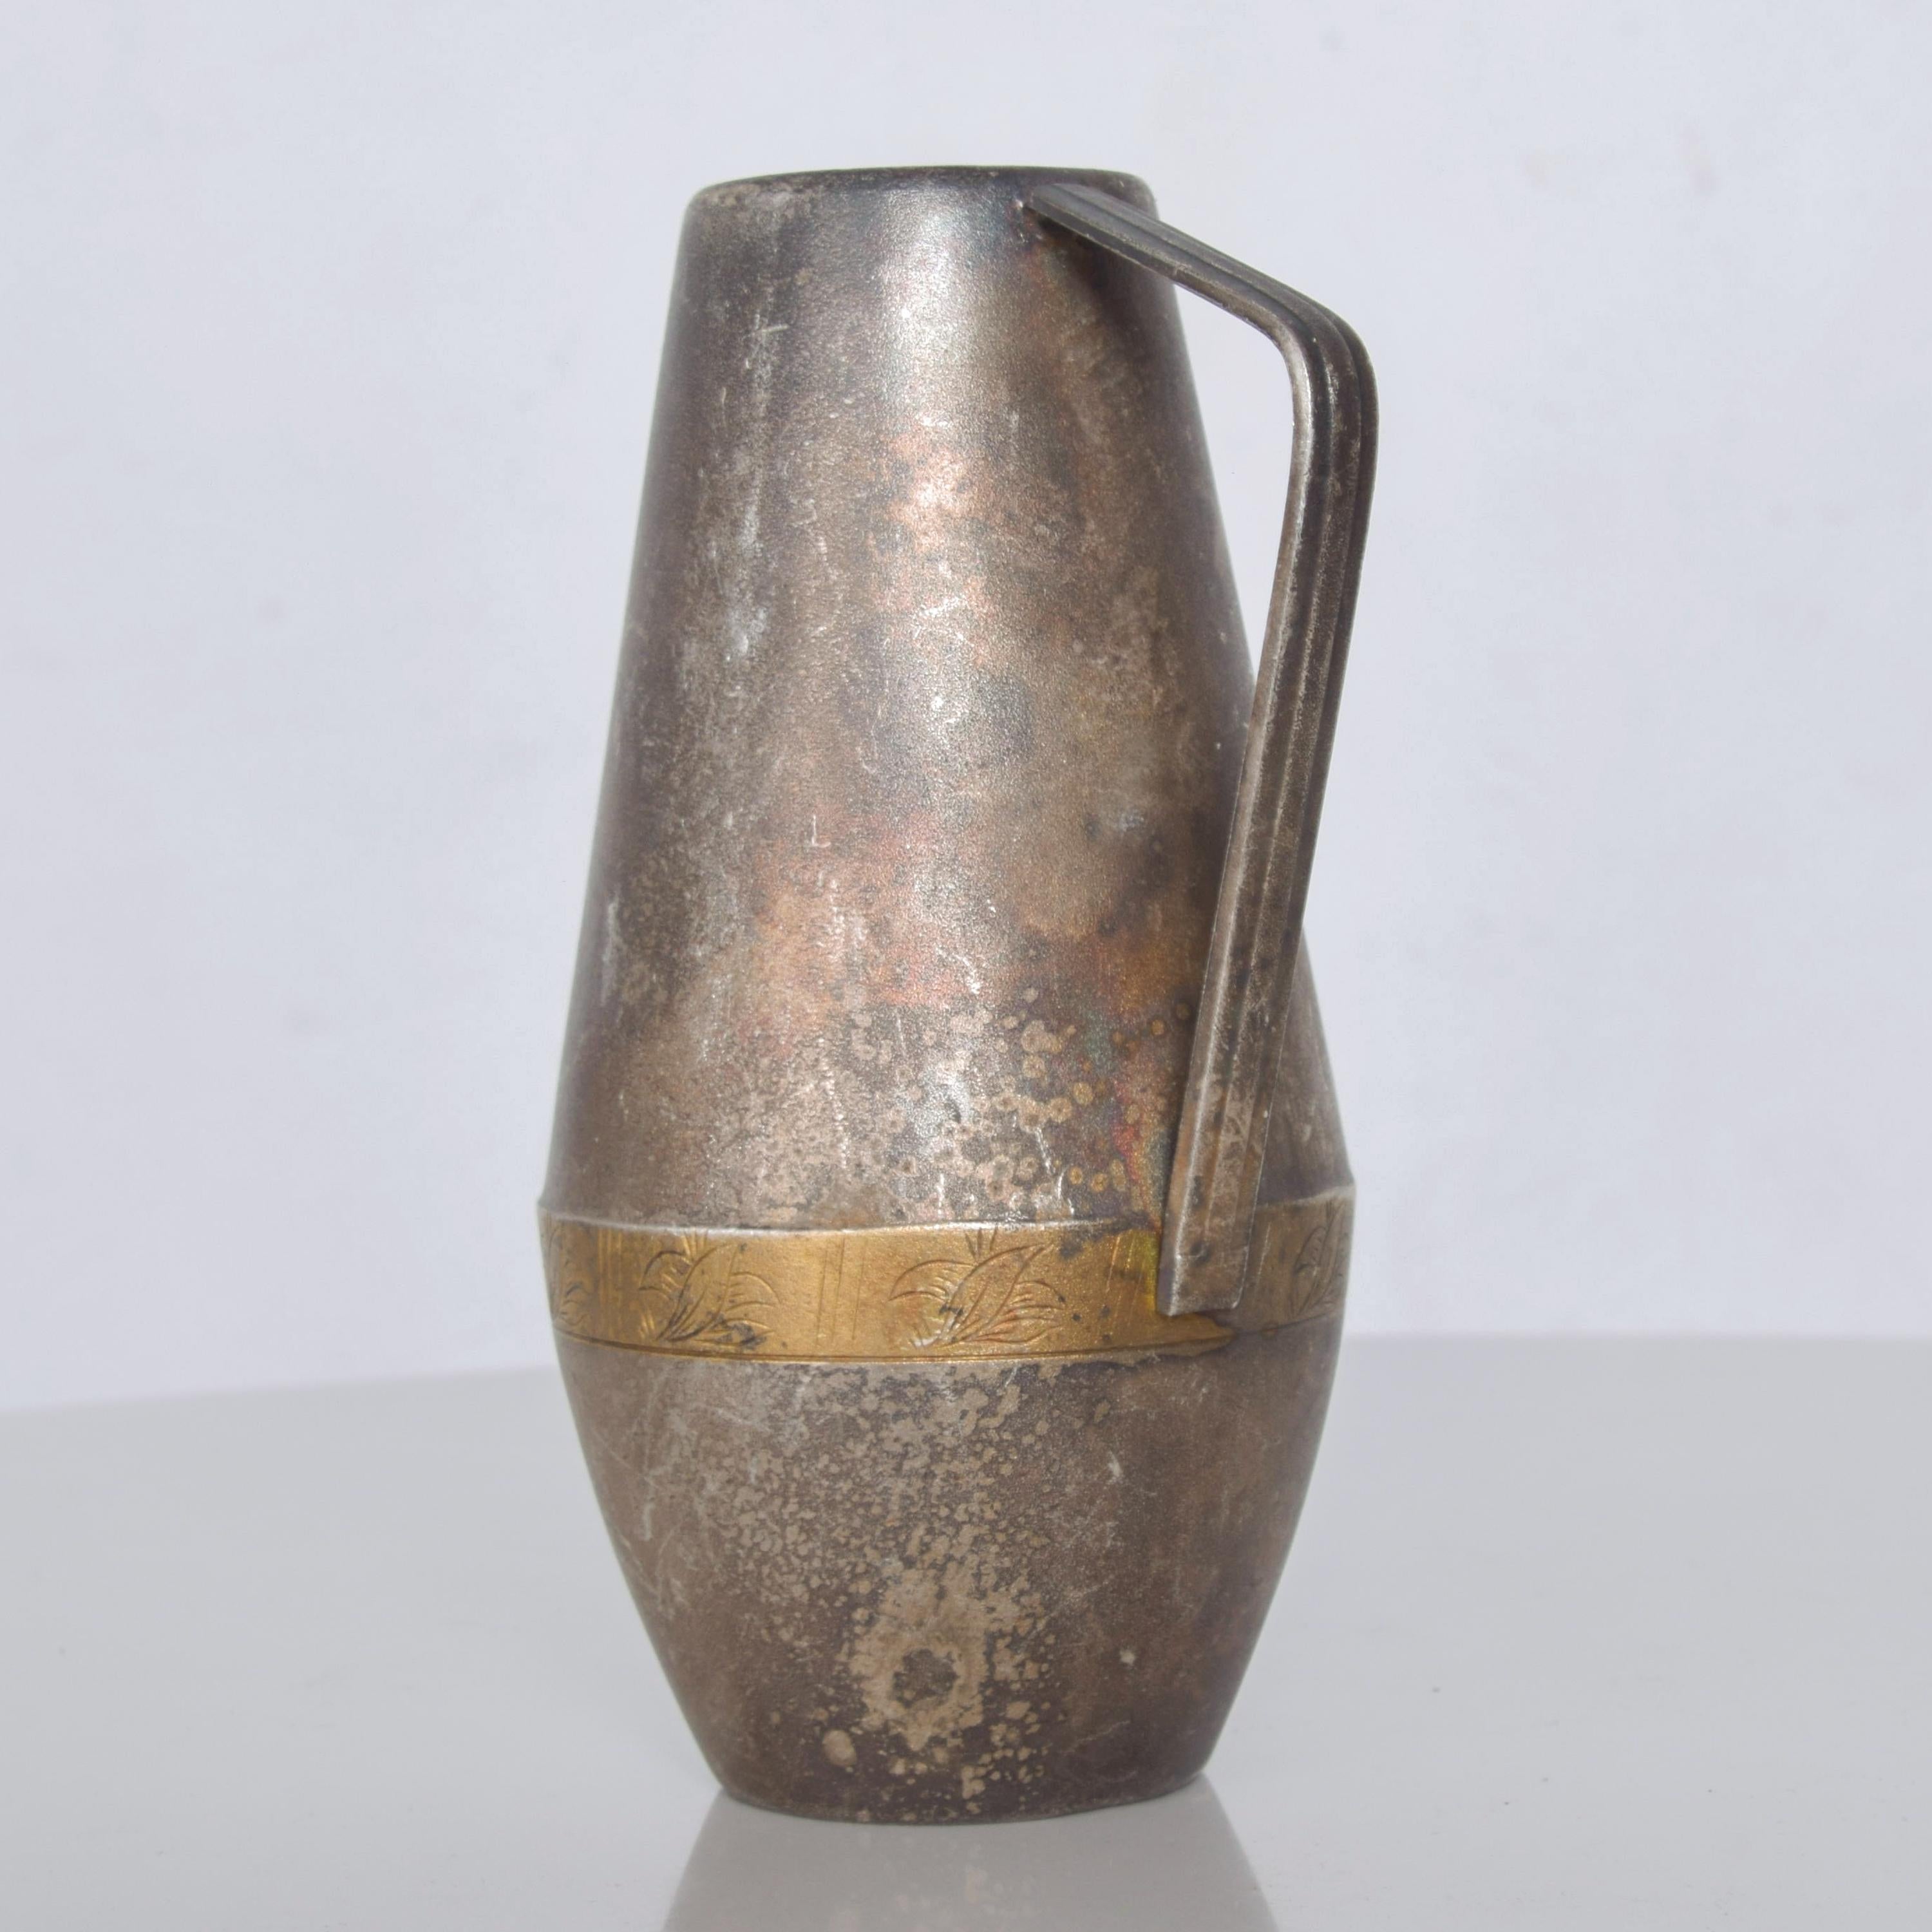 Decorative item petite modern pitcher creamer Russian silver plated with brass ornamentation.
Signed on the bottom SIOMMET.
Patina present. Scuffs present. Sold as is. Original unrestored vintage presentation and condition.
Measures: 5.5